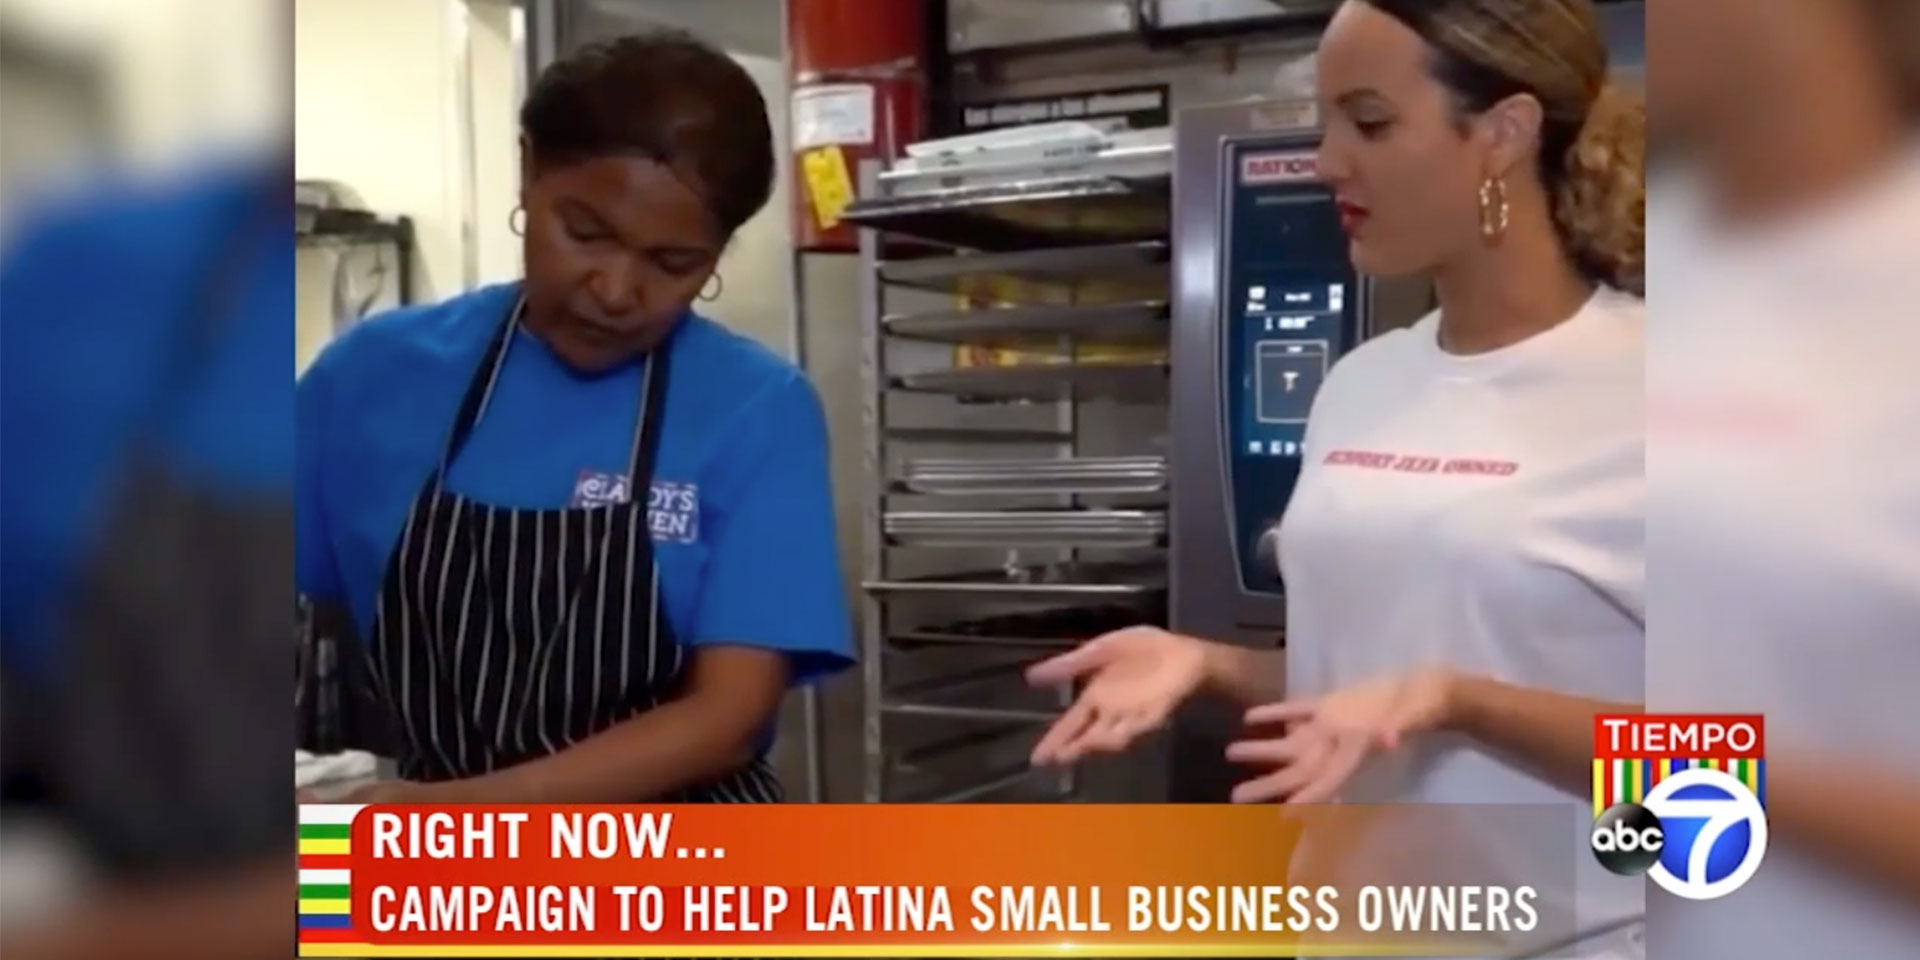 Tiempo: Pepsico announces national campaign to help Latina small business owners